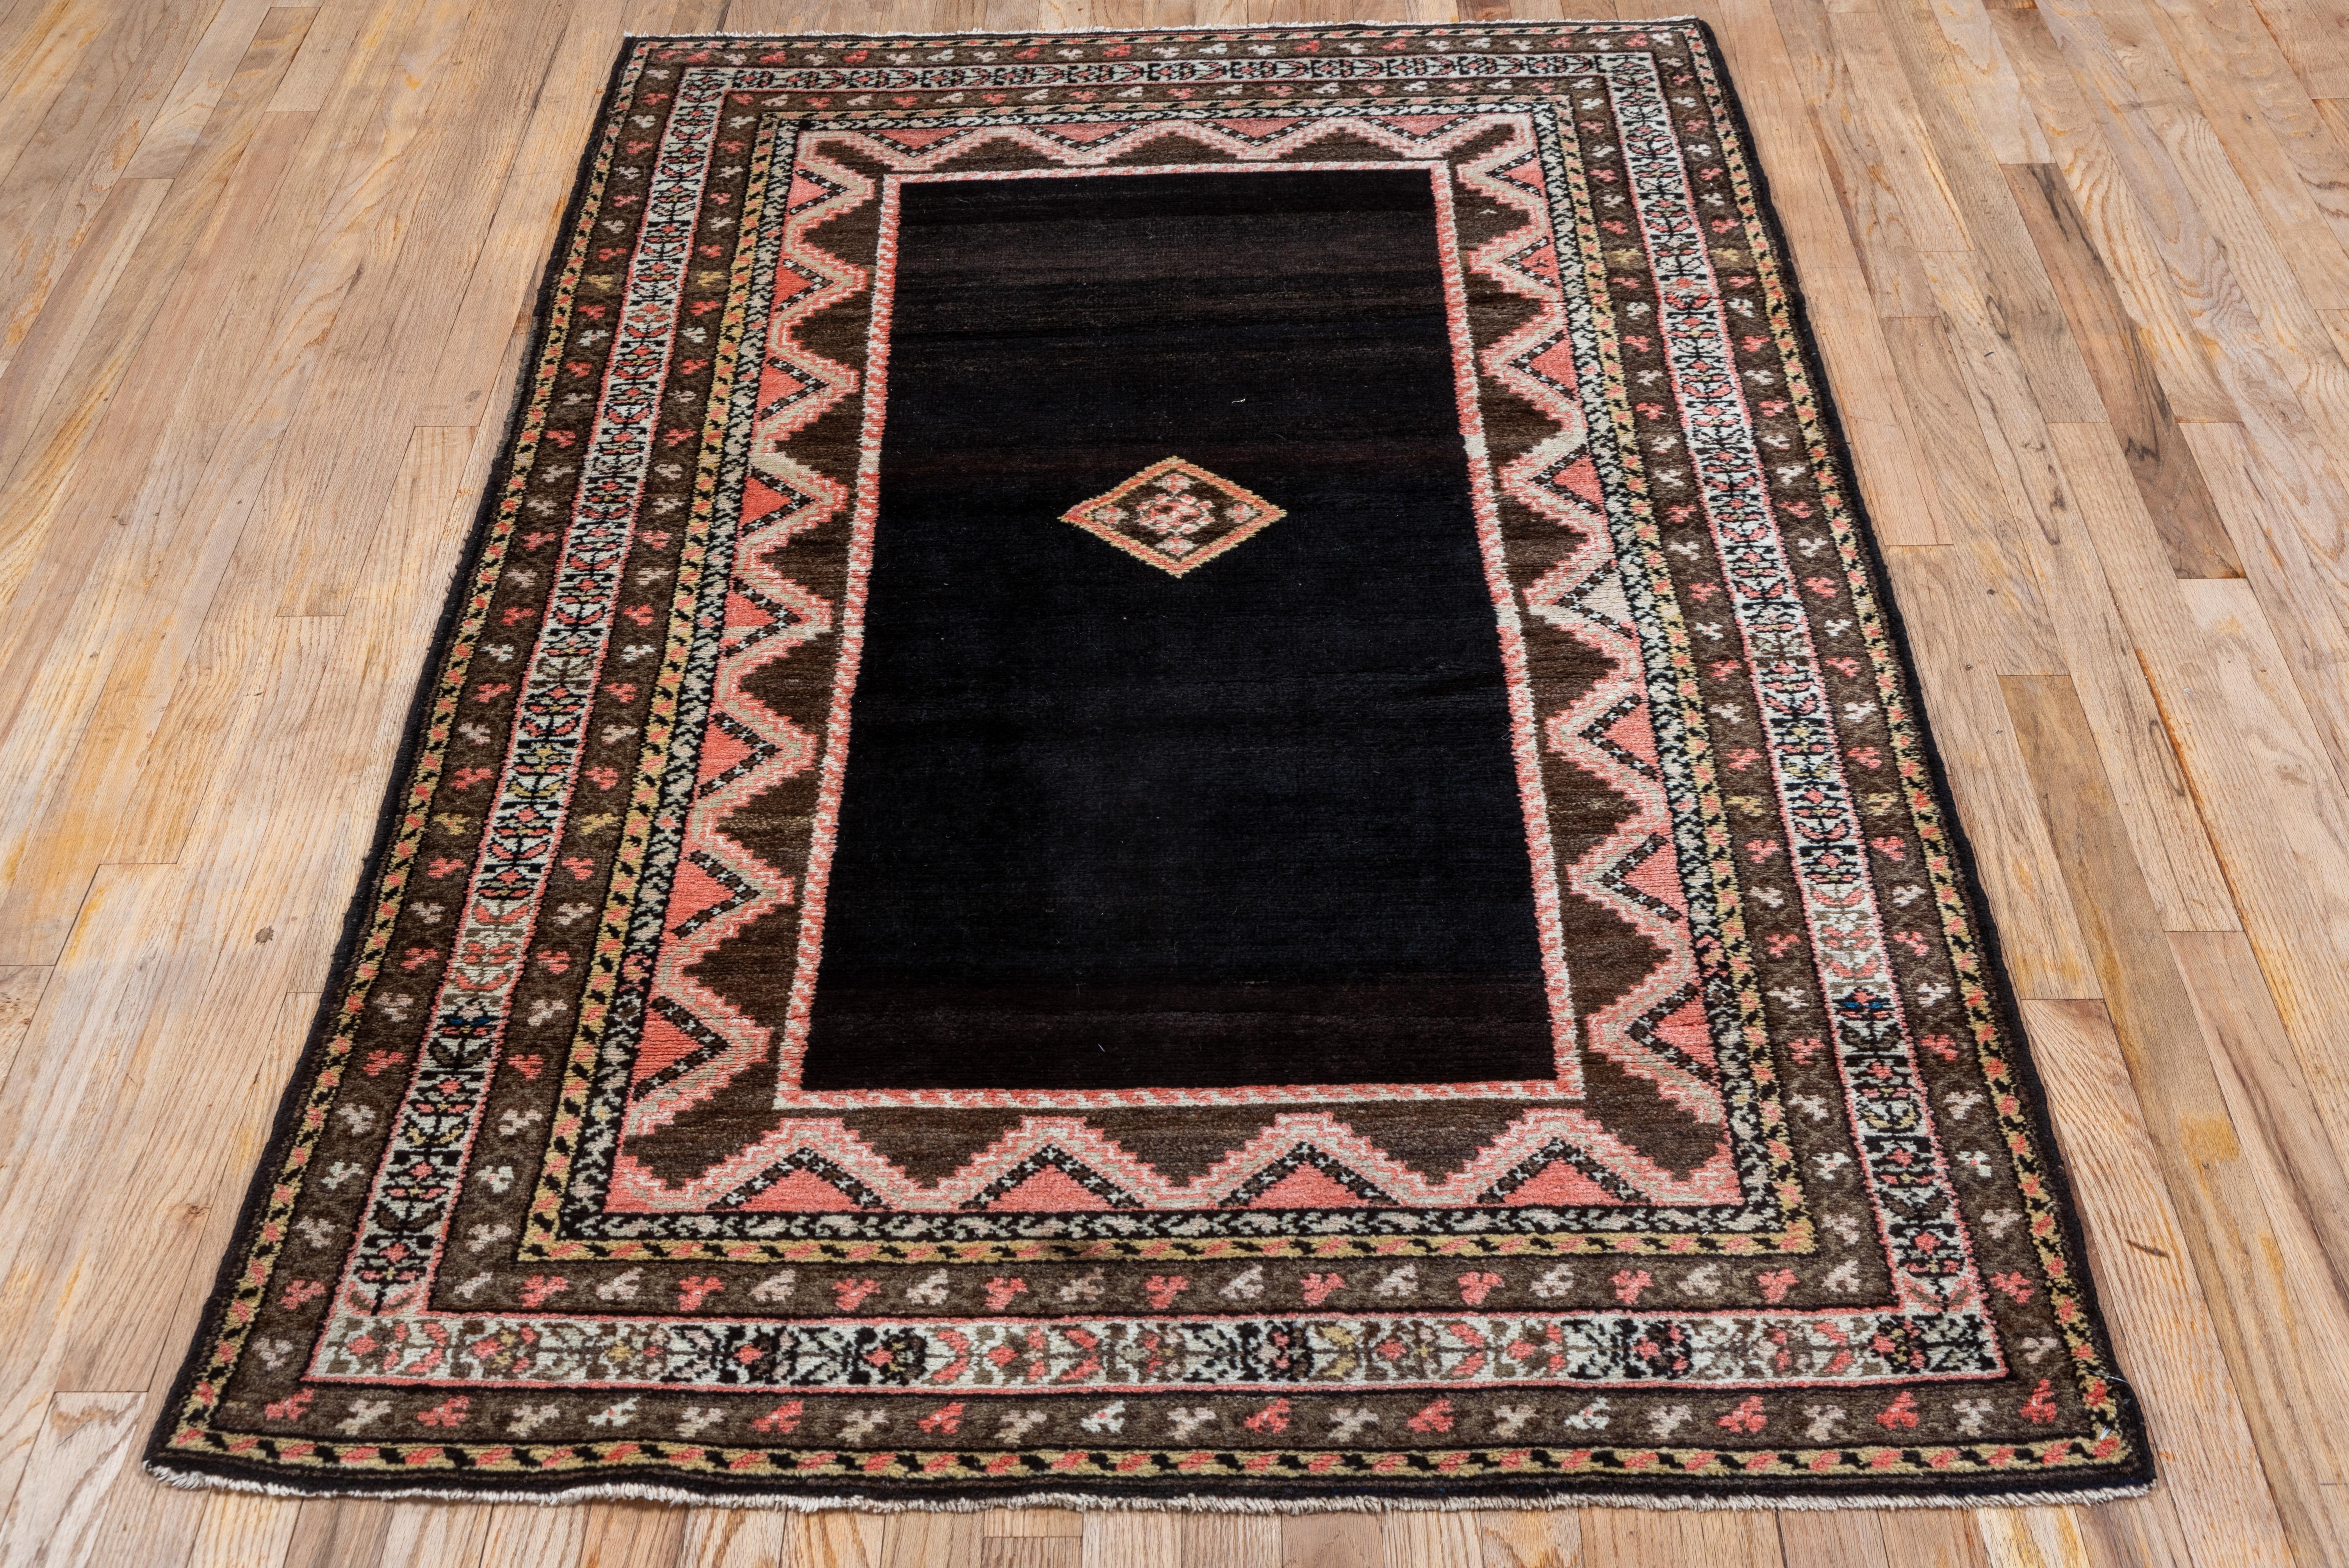 Antique Rustic Persian Hamadan Rug, Chocolate Brown Field, Pink Accents In Good Condition For Sale In New York, NY